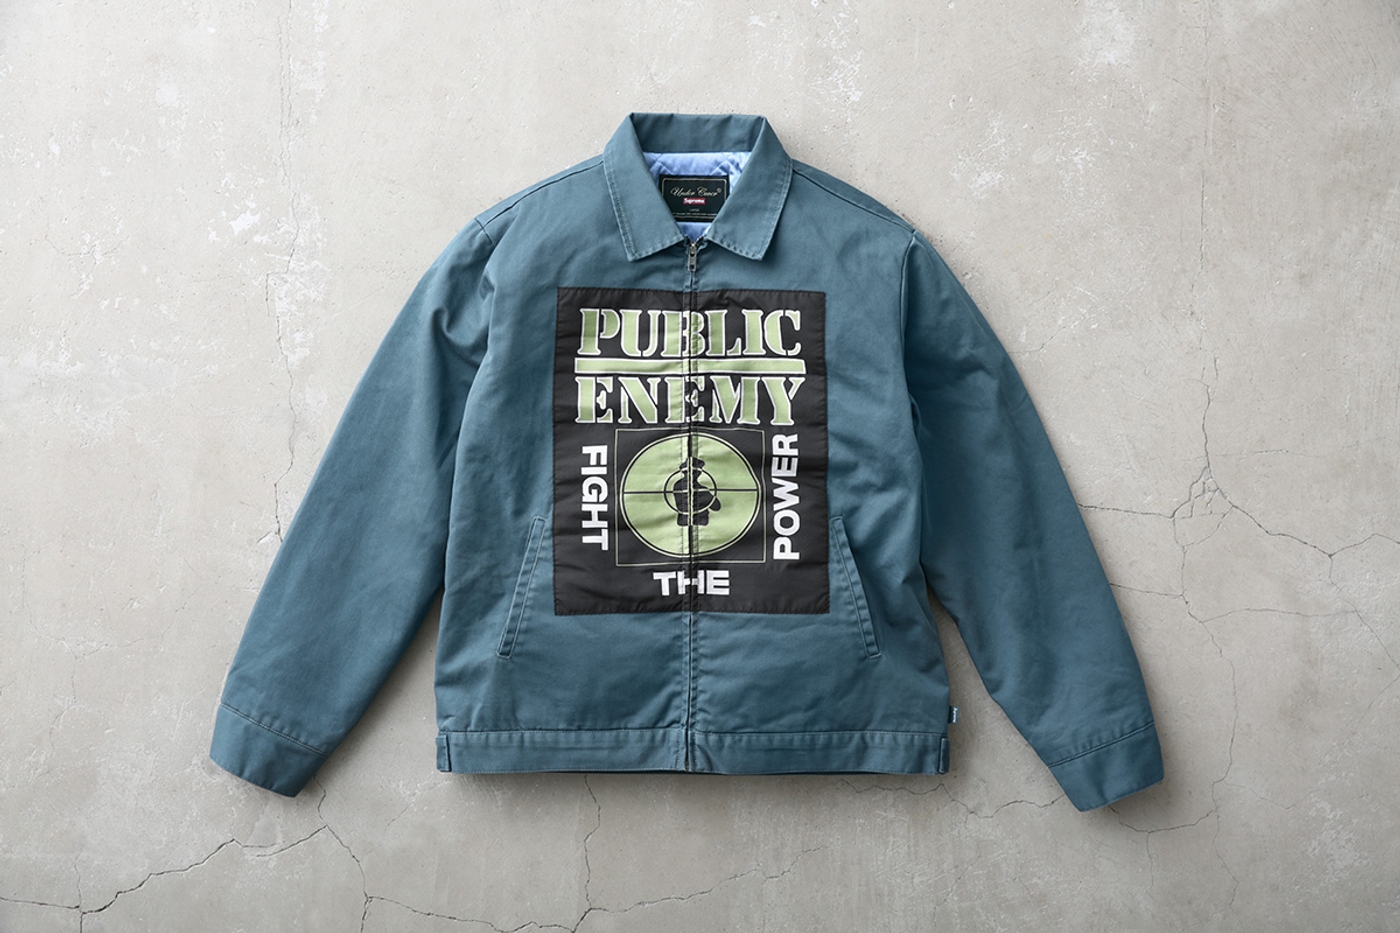 Work Jacket with woven patch. (13/52)